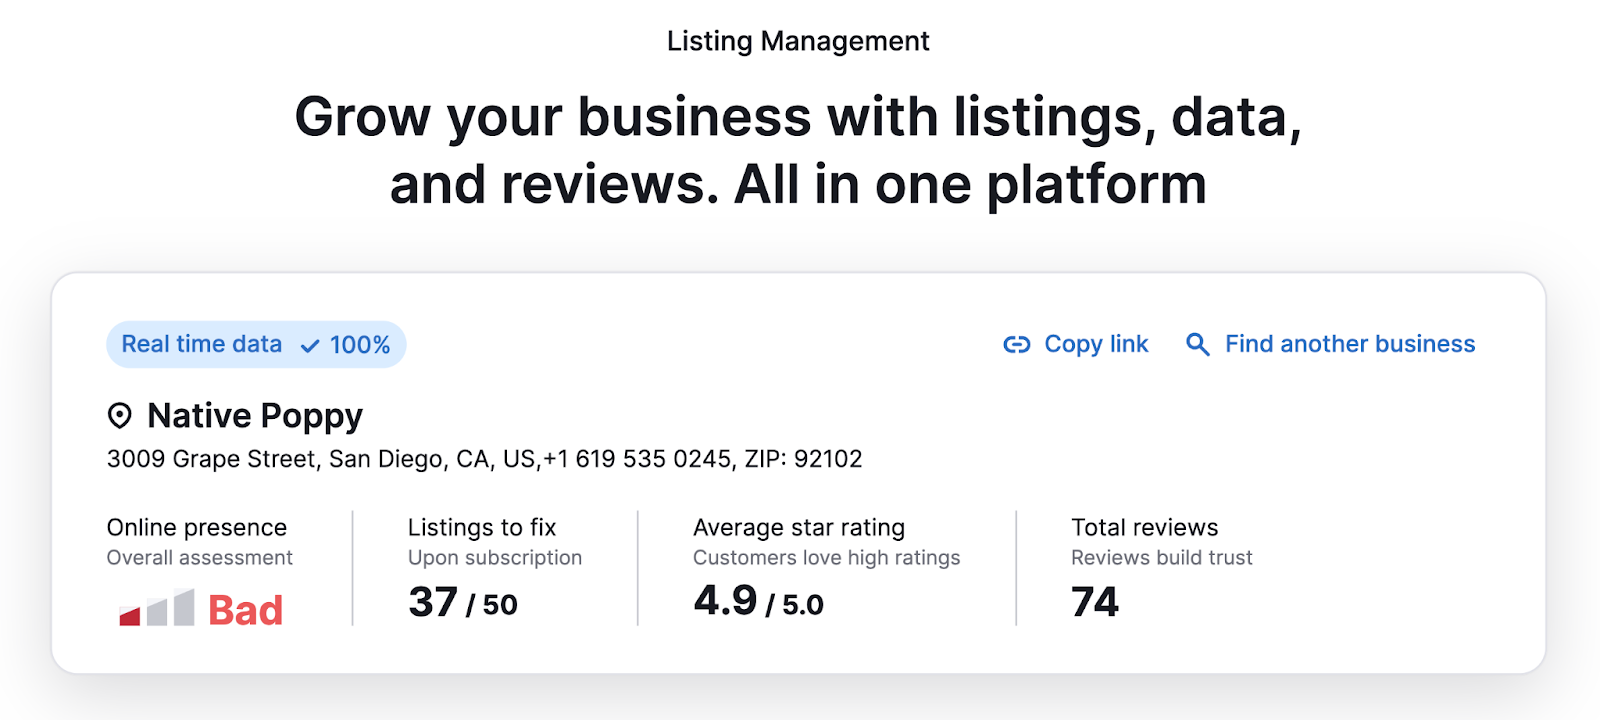 an overview of local online presence in Listing Management tool